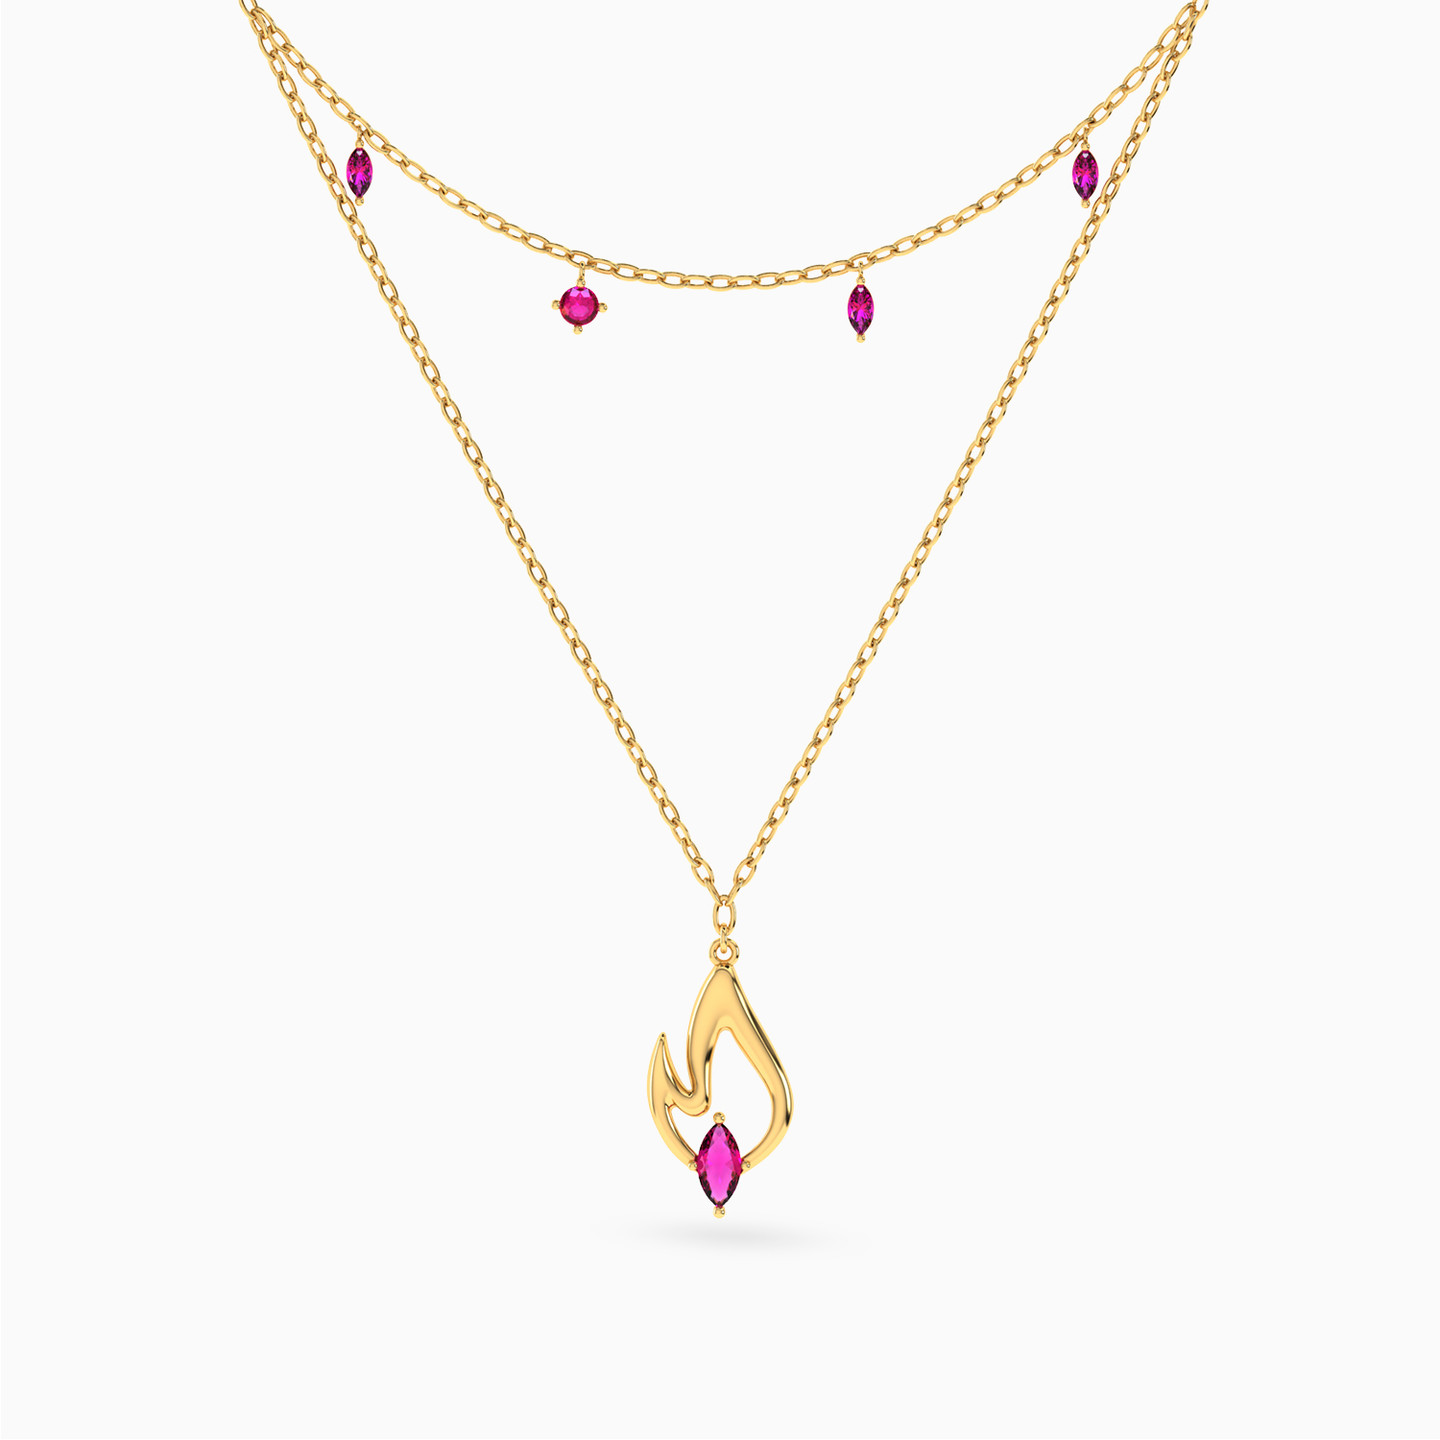 18K Gold Colored Stones Layered Necklace